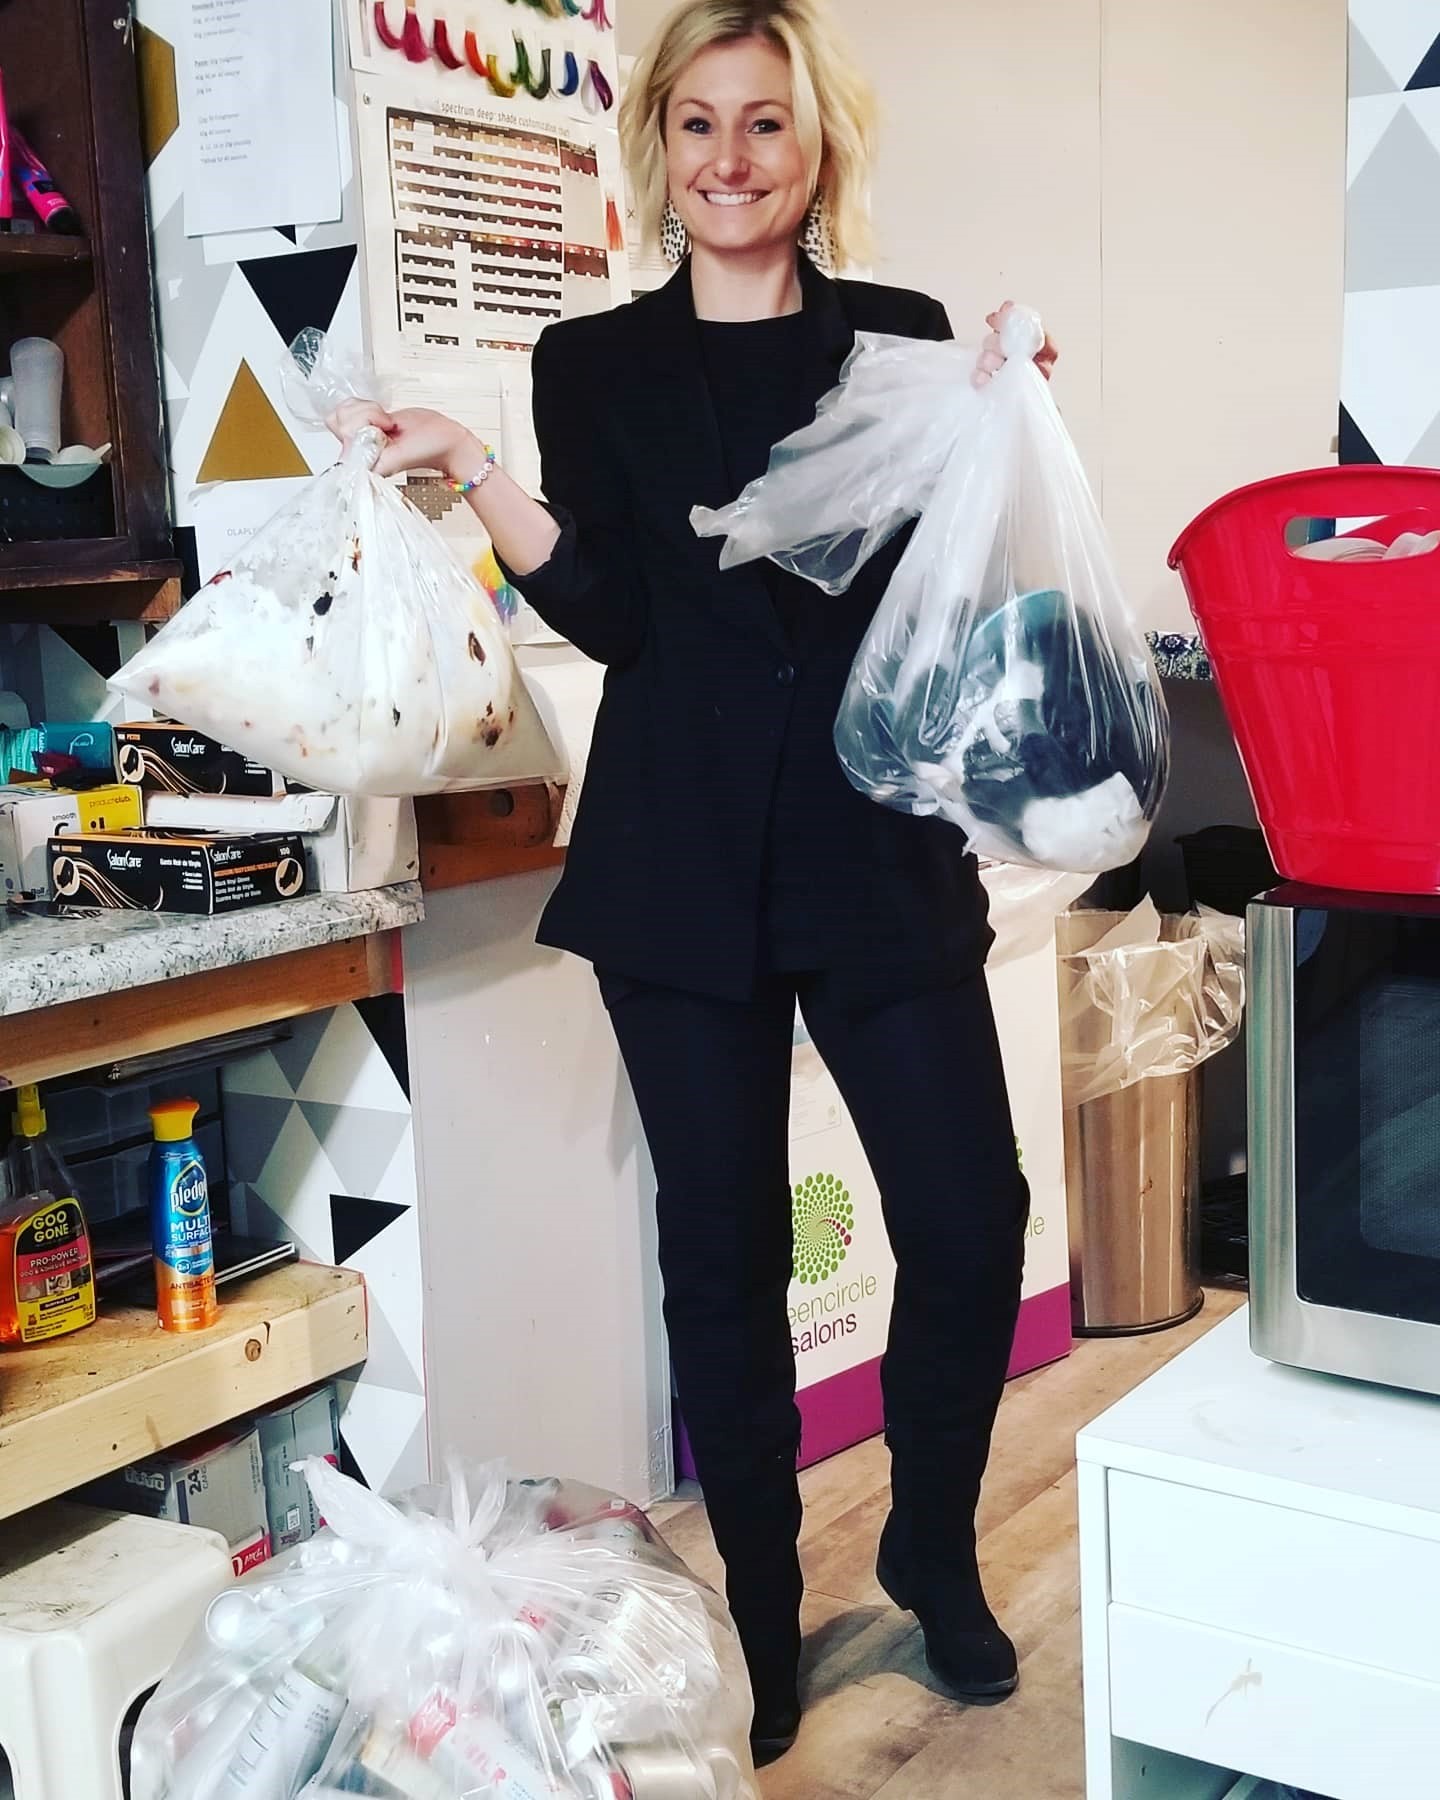 Nostallja stylist Krissi Butenhoff with an assortment of recycling ready to be sent to Green Cycle.